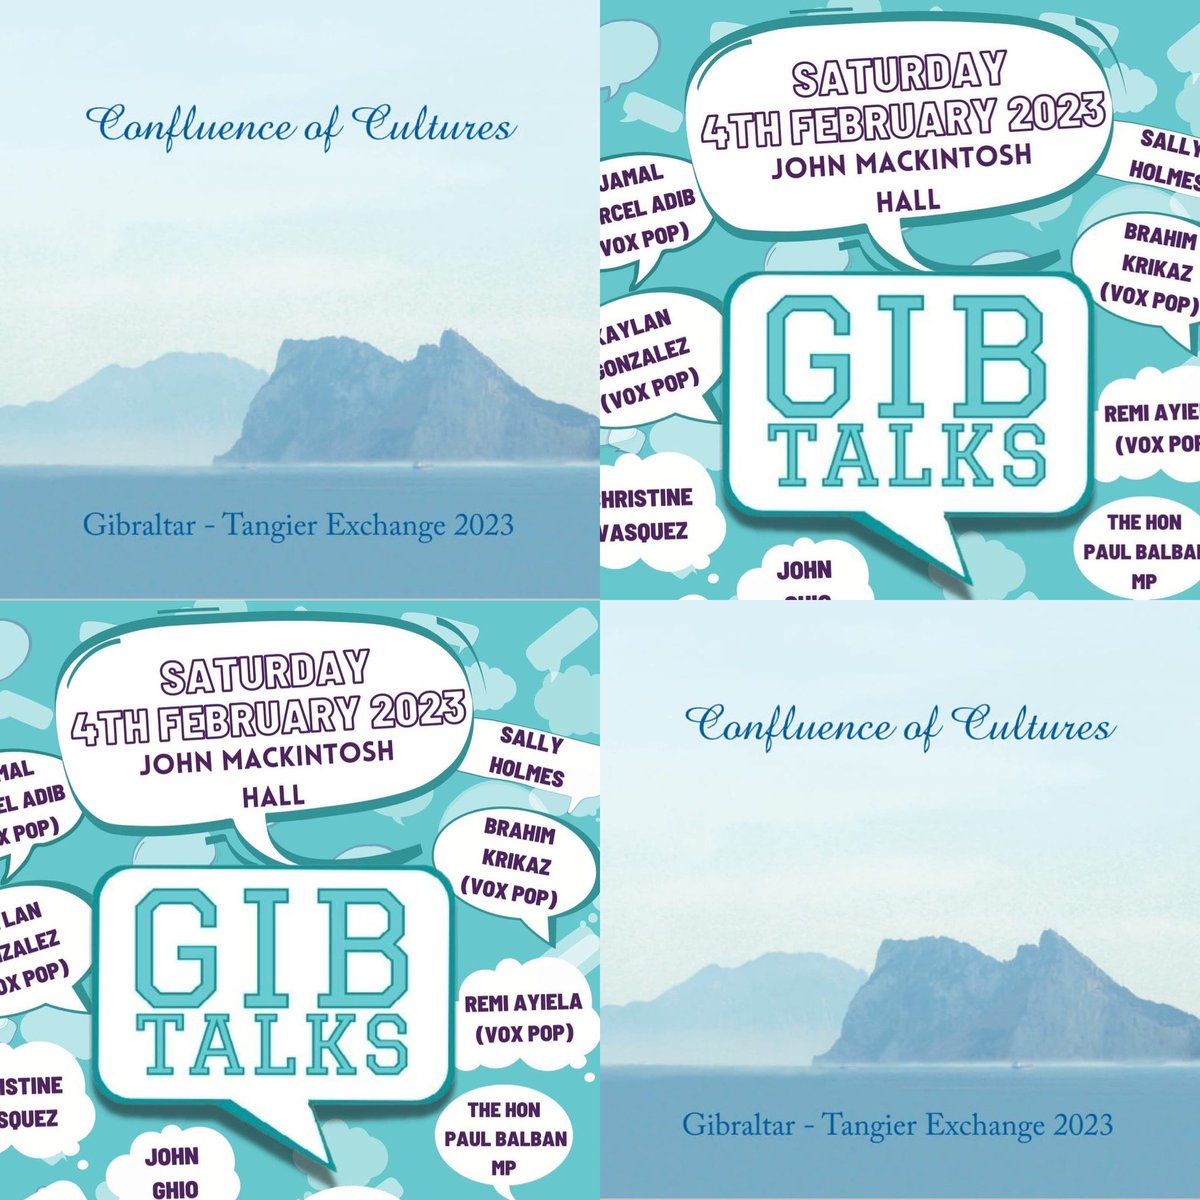 We park the TAXI for now and move to two projects. This week we start a three week art exhibition and cultural events in Tangier. Plus this weekend the annual Gibtalks returns to the John Mac Hall. #gibcultureinspires